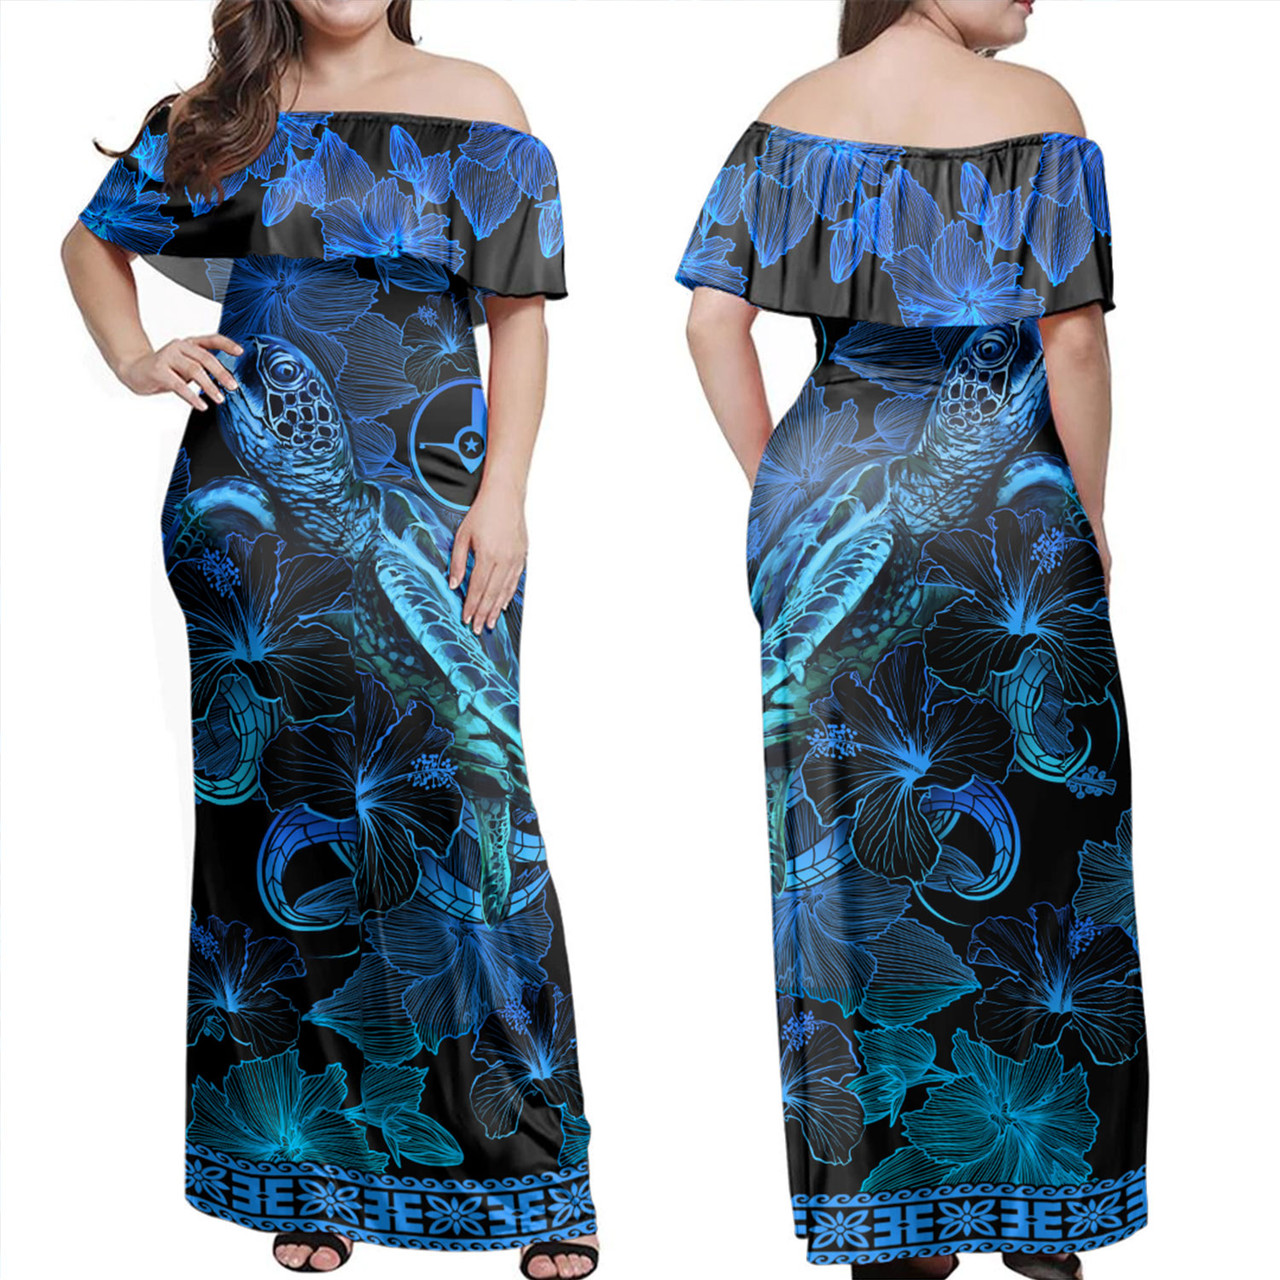 Yap State Off Shoulder Long Dress Sea Turtle With Blooming Hibiscus Flowers Tribal Blue